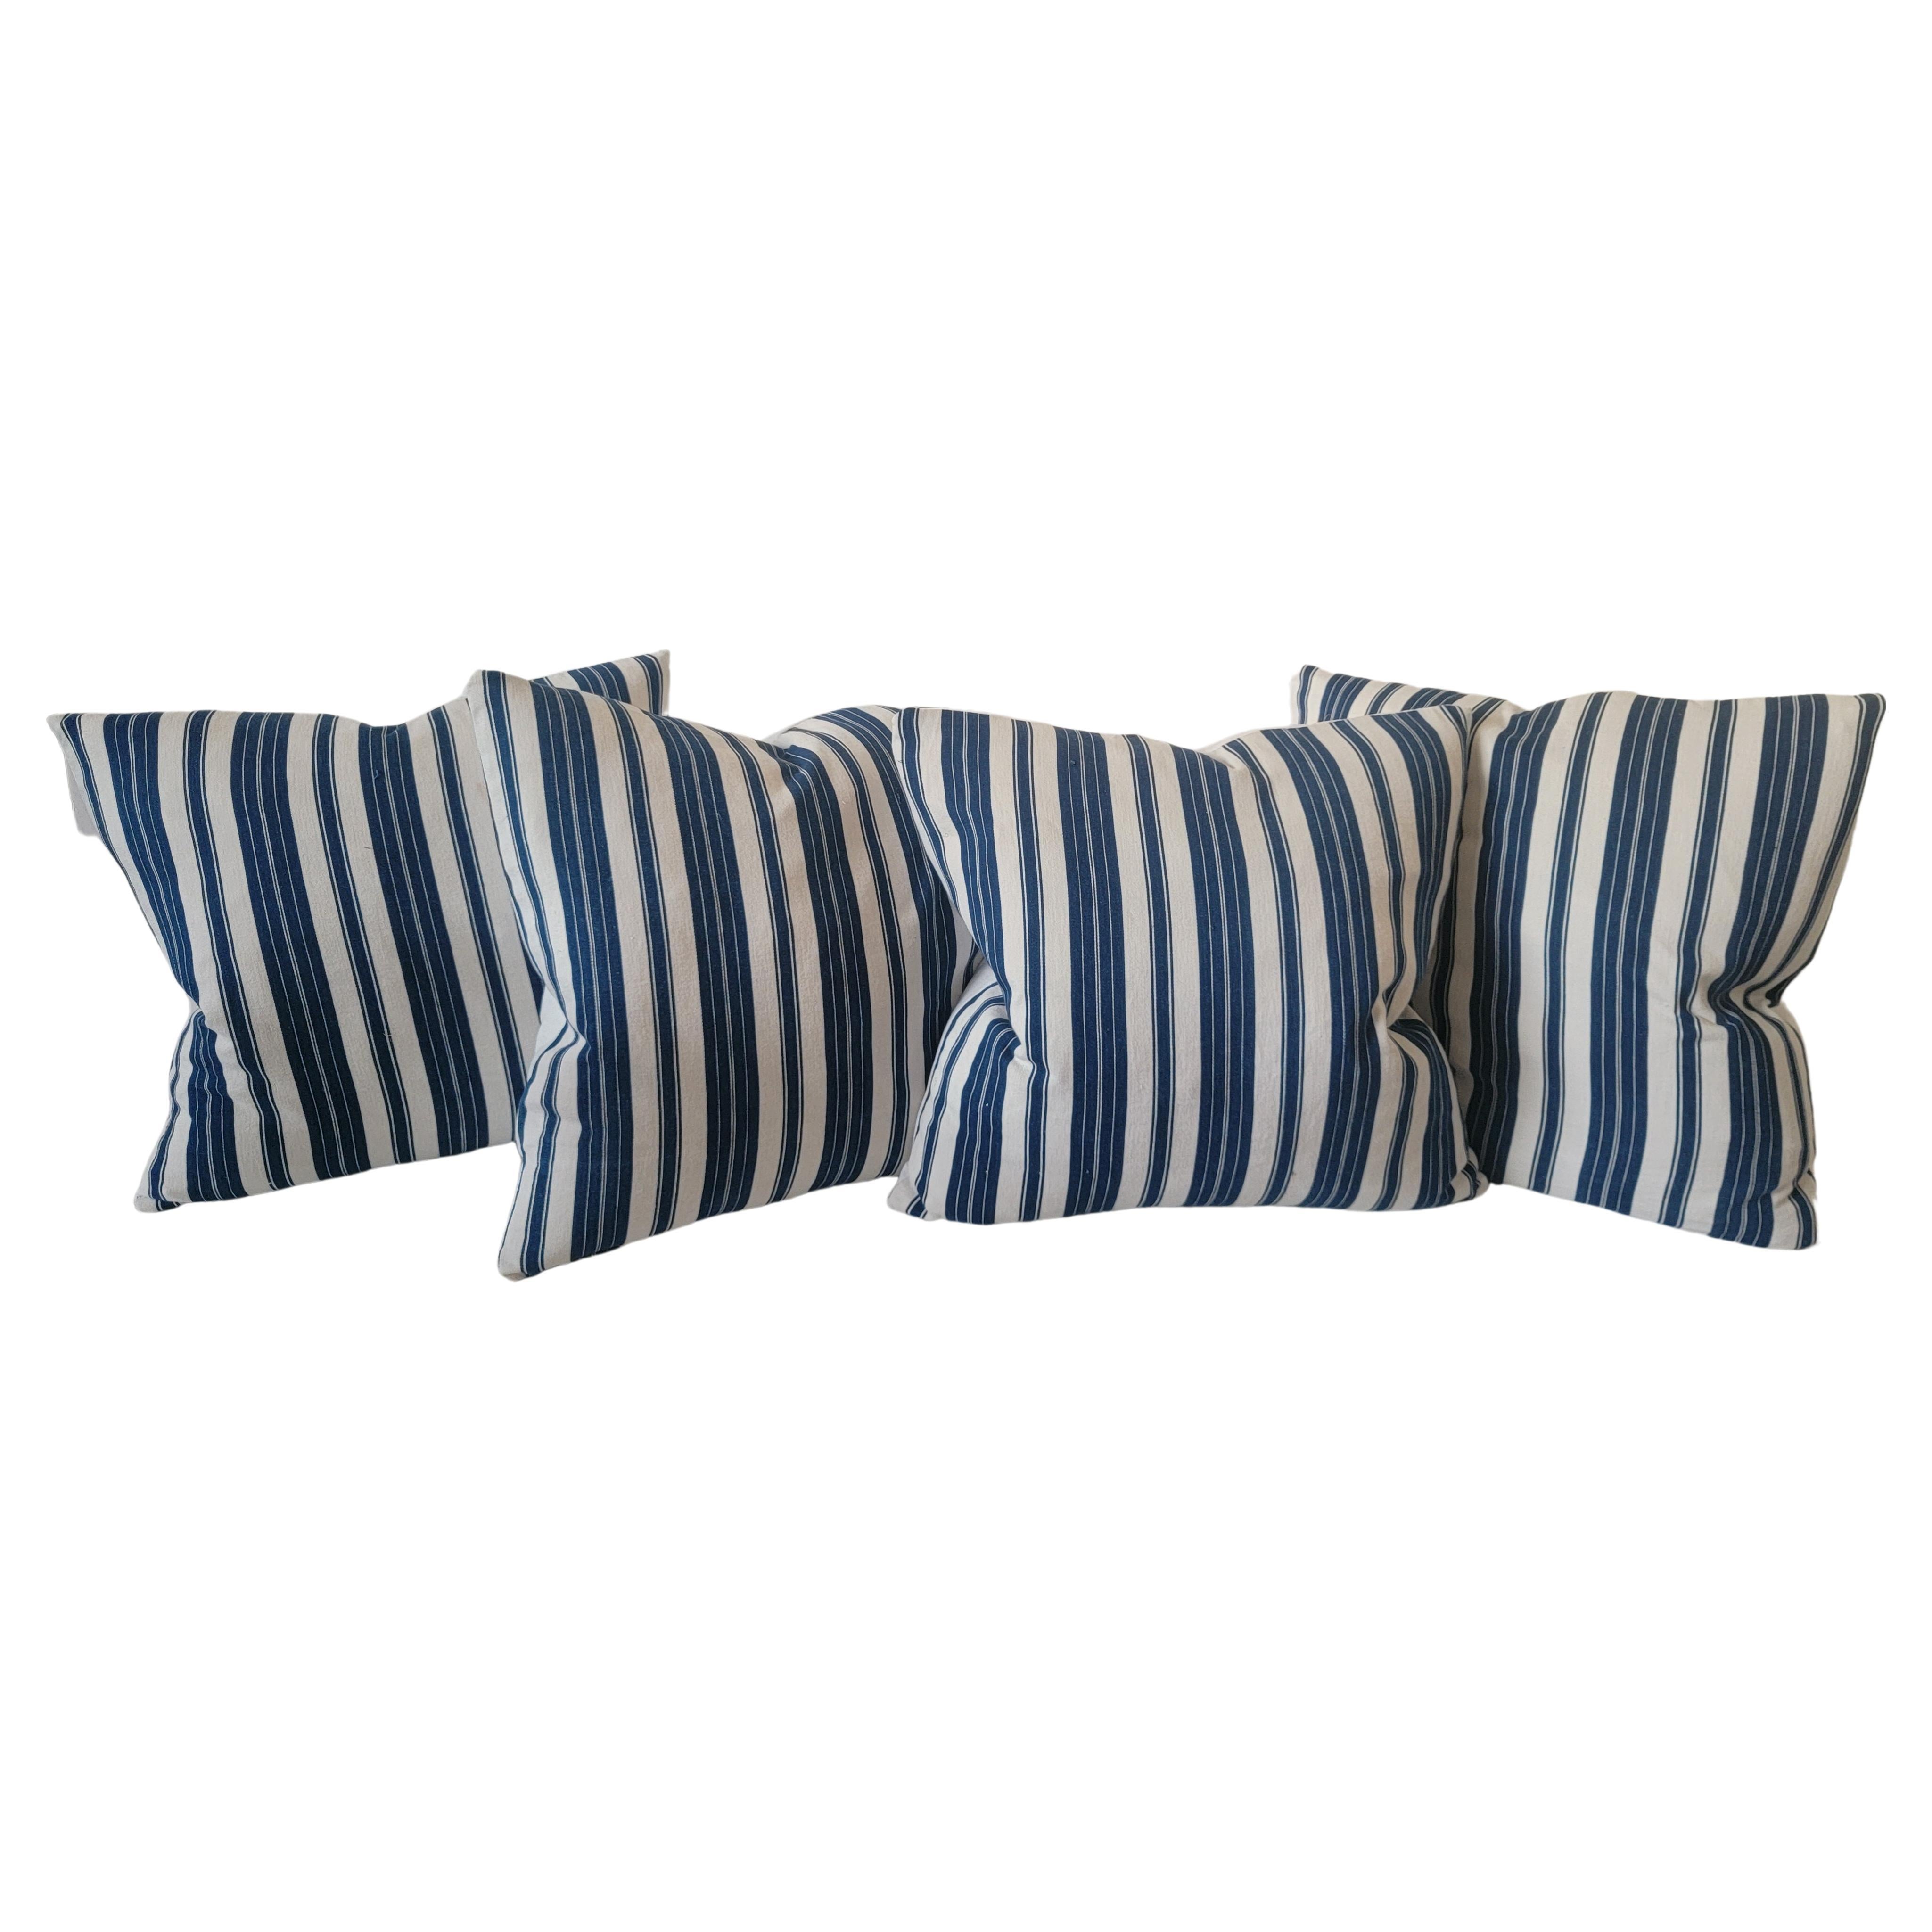 19thc Blue and White Striped Ticking Pillows